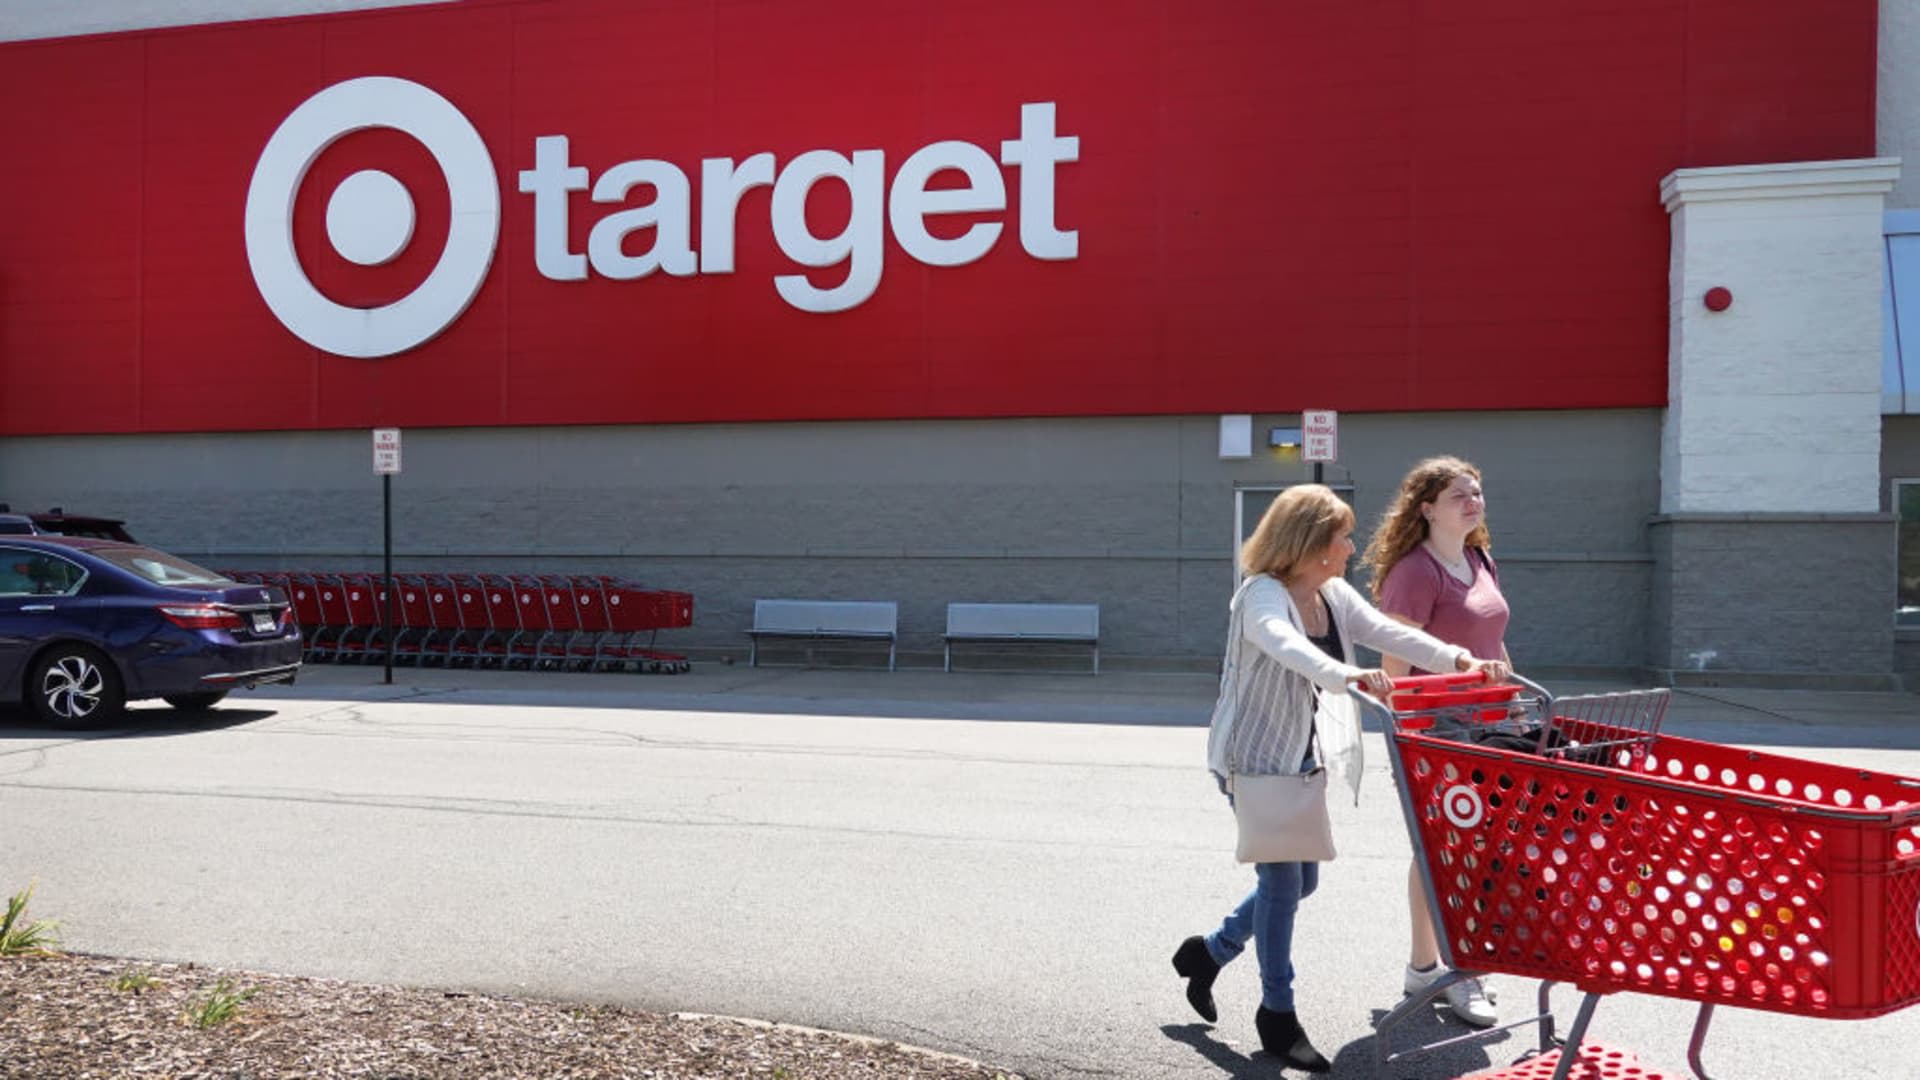 Target to reportedly cut LGBTQ Pride month products from some stores after backlash